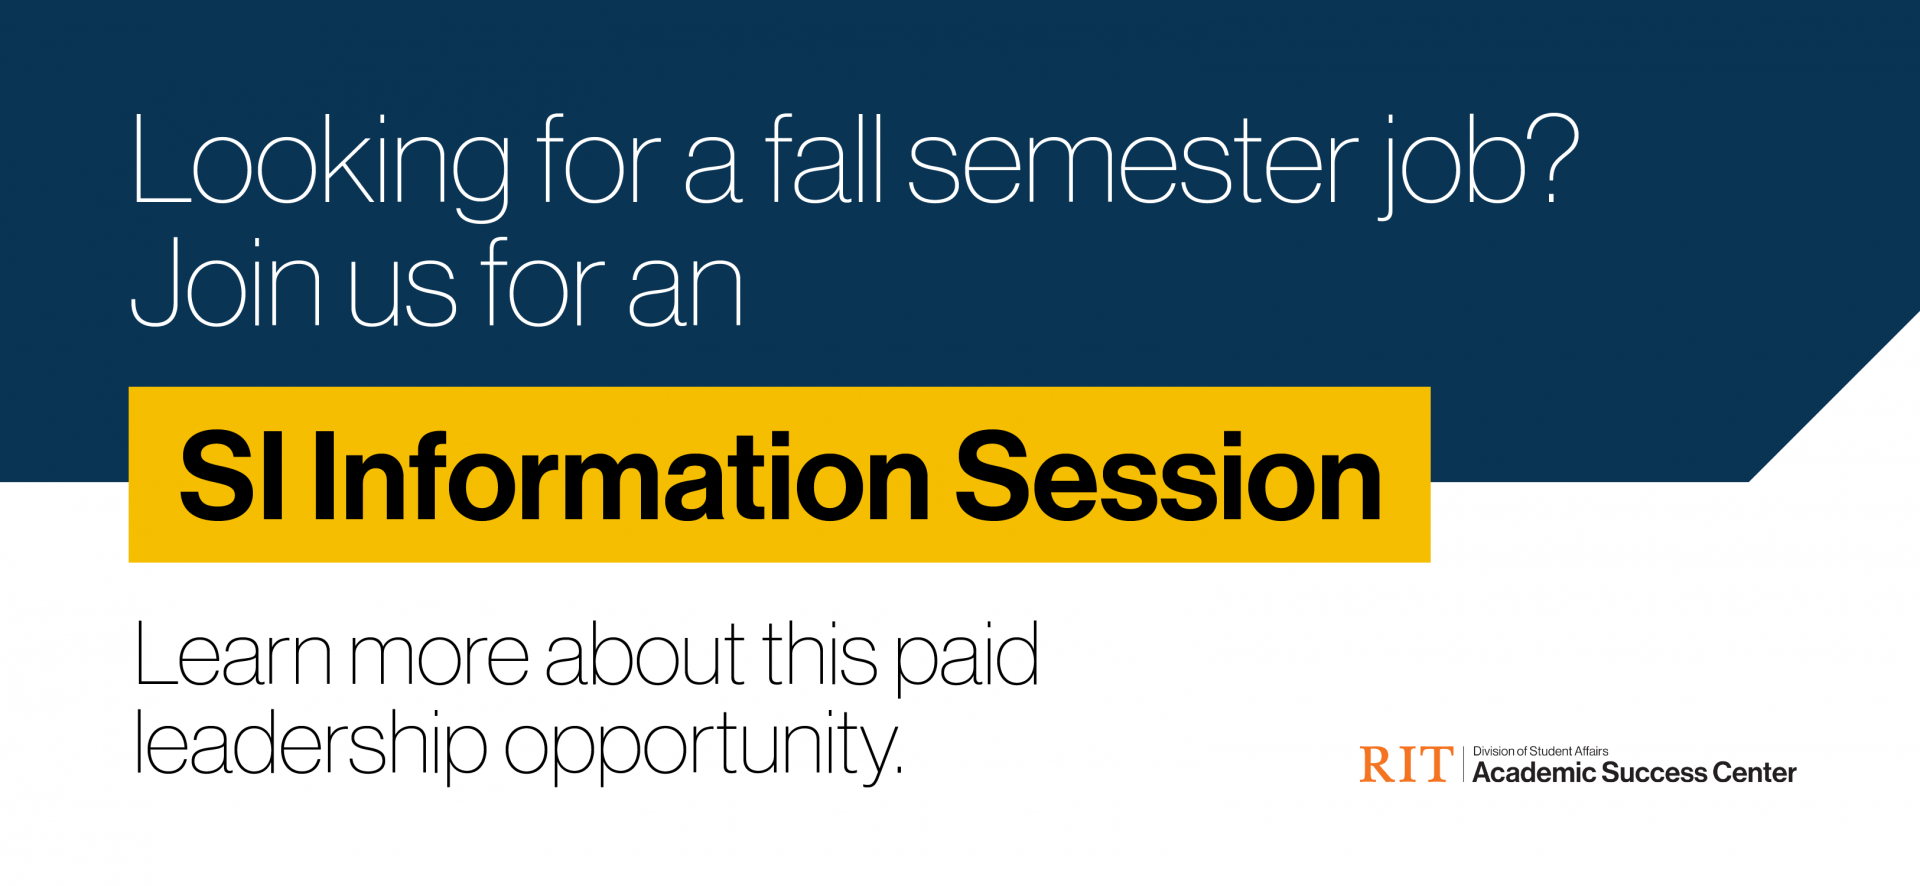 Graphic image that say looking for a fall semester job? Join us for an SI Information Session